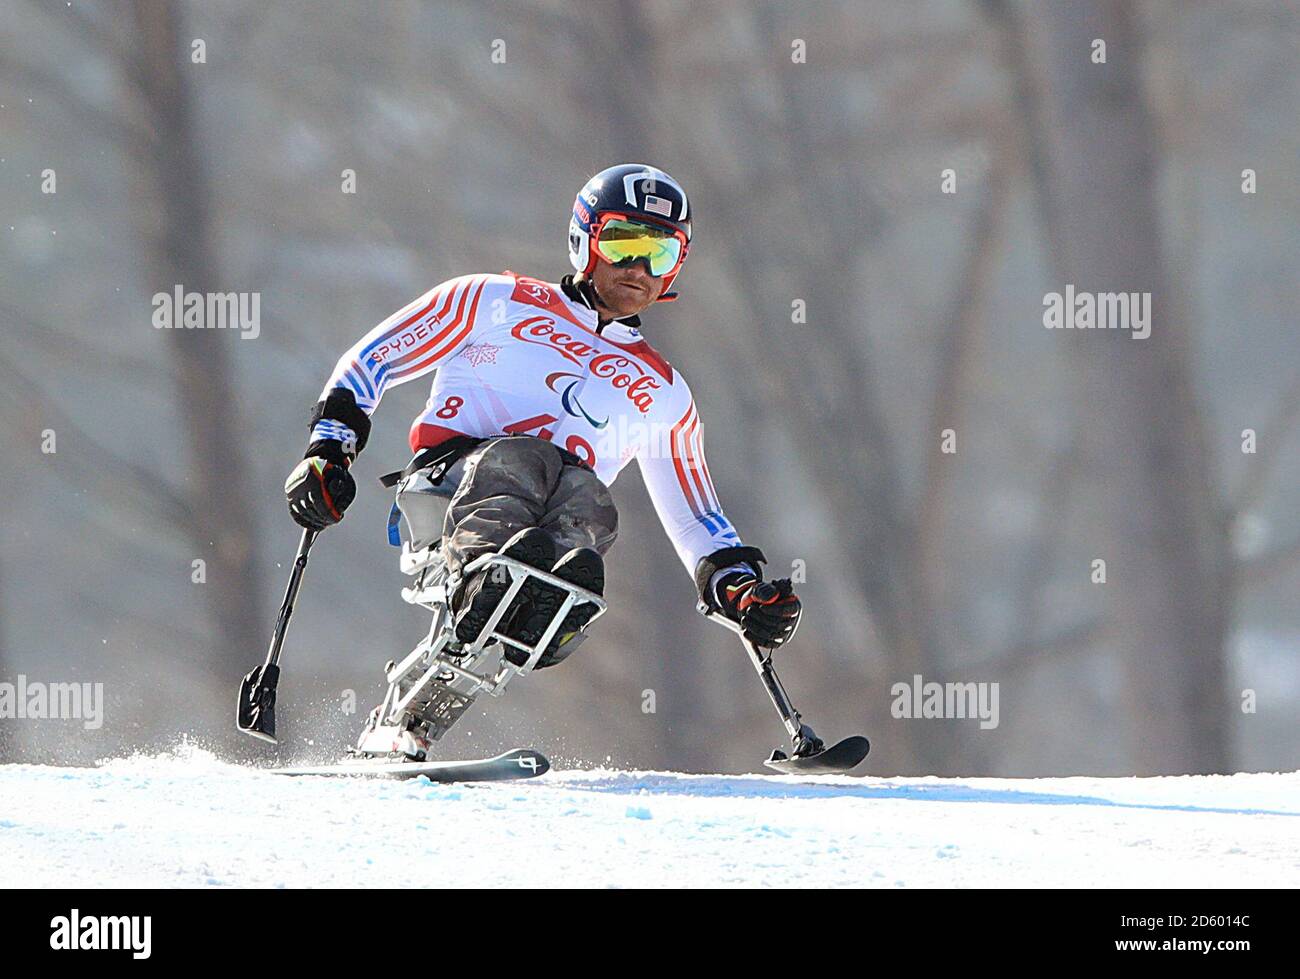 USA's Stephen Lawler in the Men's Downhill, Sitting during day one of the PyeongChang 2018 Winter Paralympics in South Korea Stock Photo